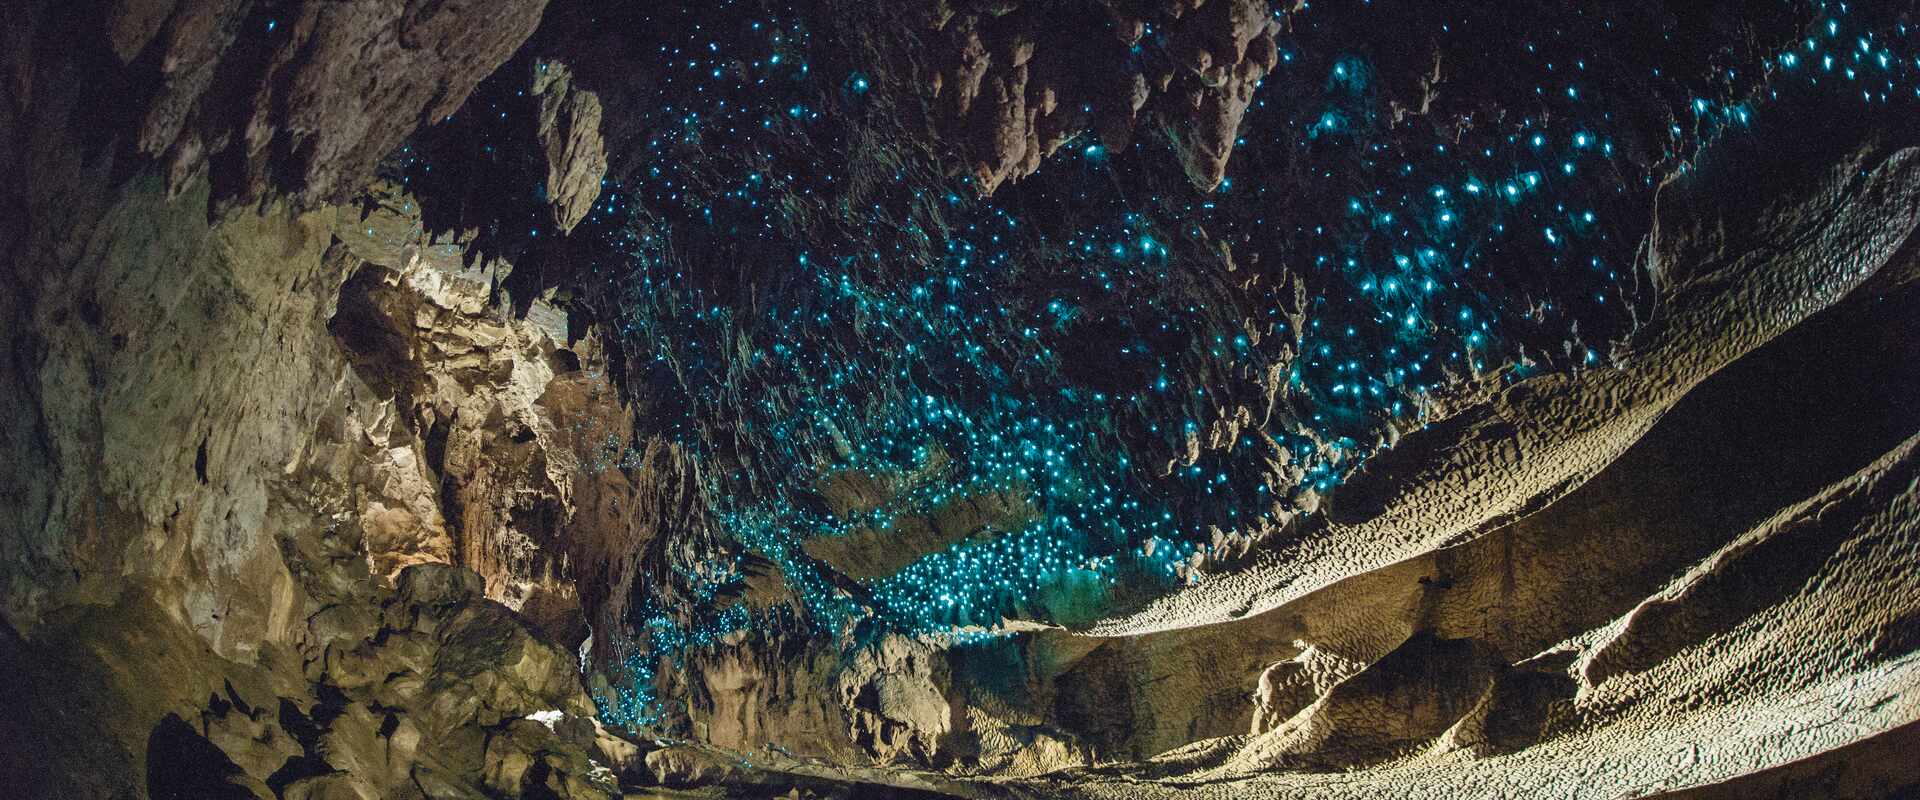 Luminescent glow worms in the Waitomo cave, New Zealand